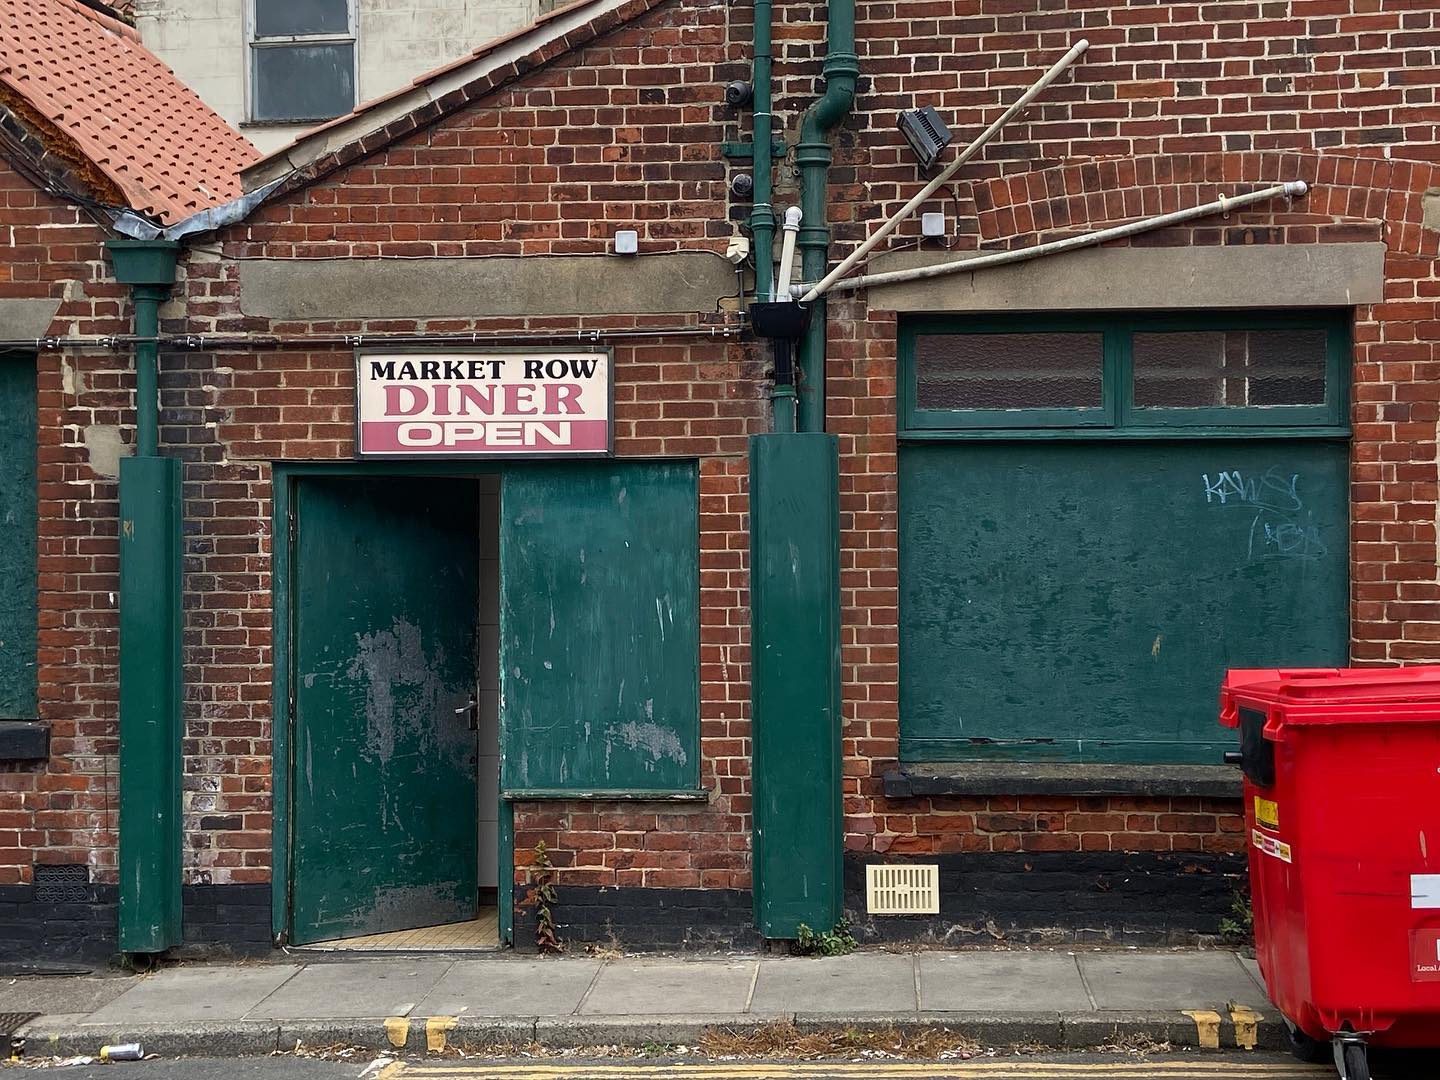 brown brick building with green shutters and doors. to the right is a red biffa bin, and above the door (which is ajar) a sign with red paint saying MARKET ROW DINER OPEN